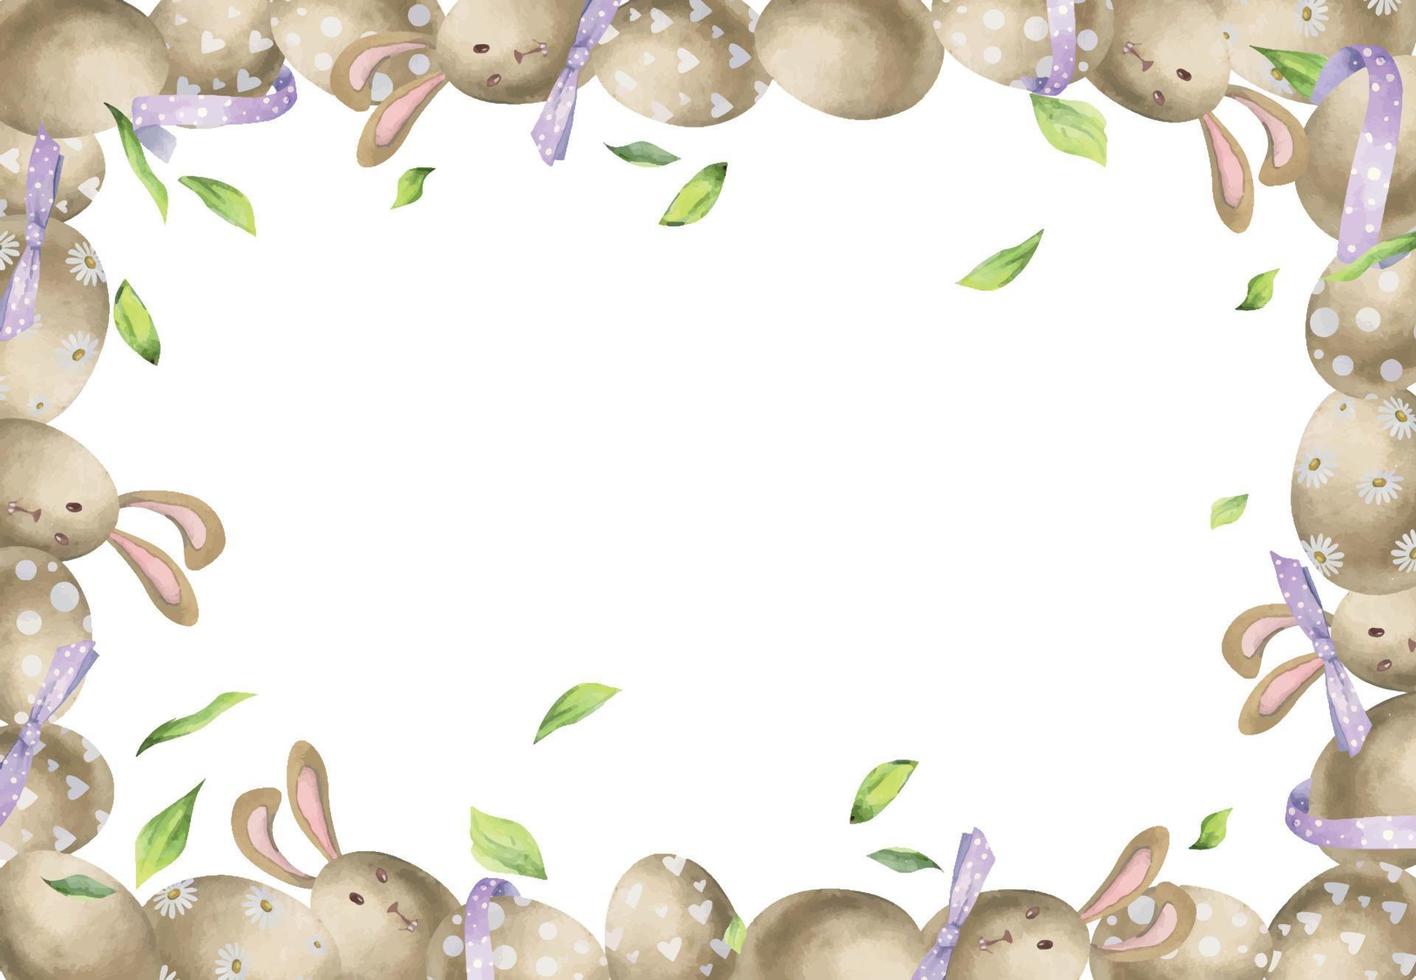 Watercolor hand drawn Easter celebration clipart. Border frame of eggs, bows, green leaves, bunnies. Pastel color. Isolated on white background. For invitations, gifts, greeting cards, print, textile vector